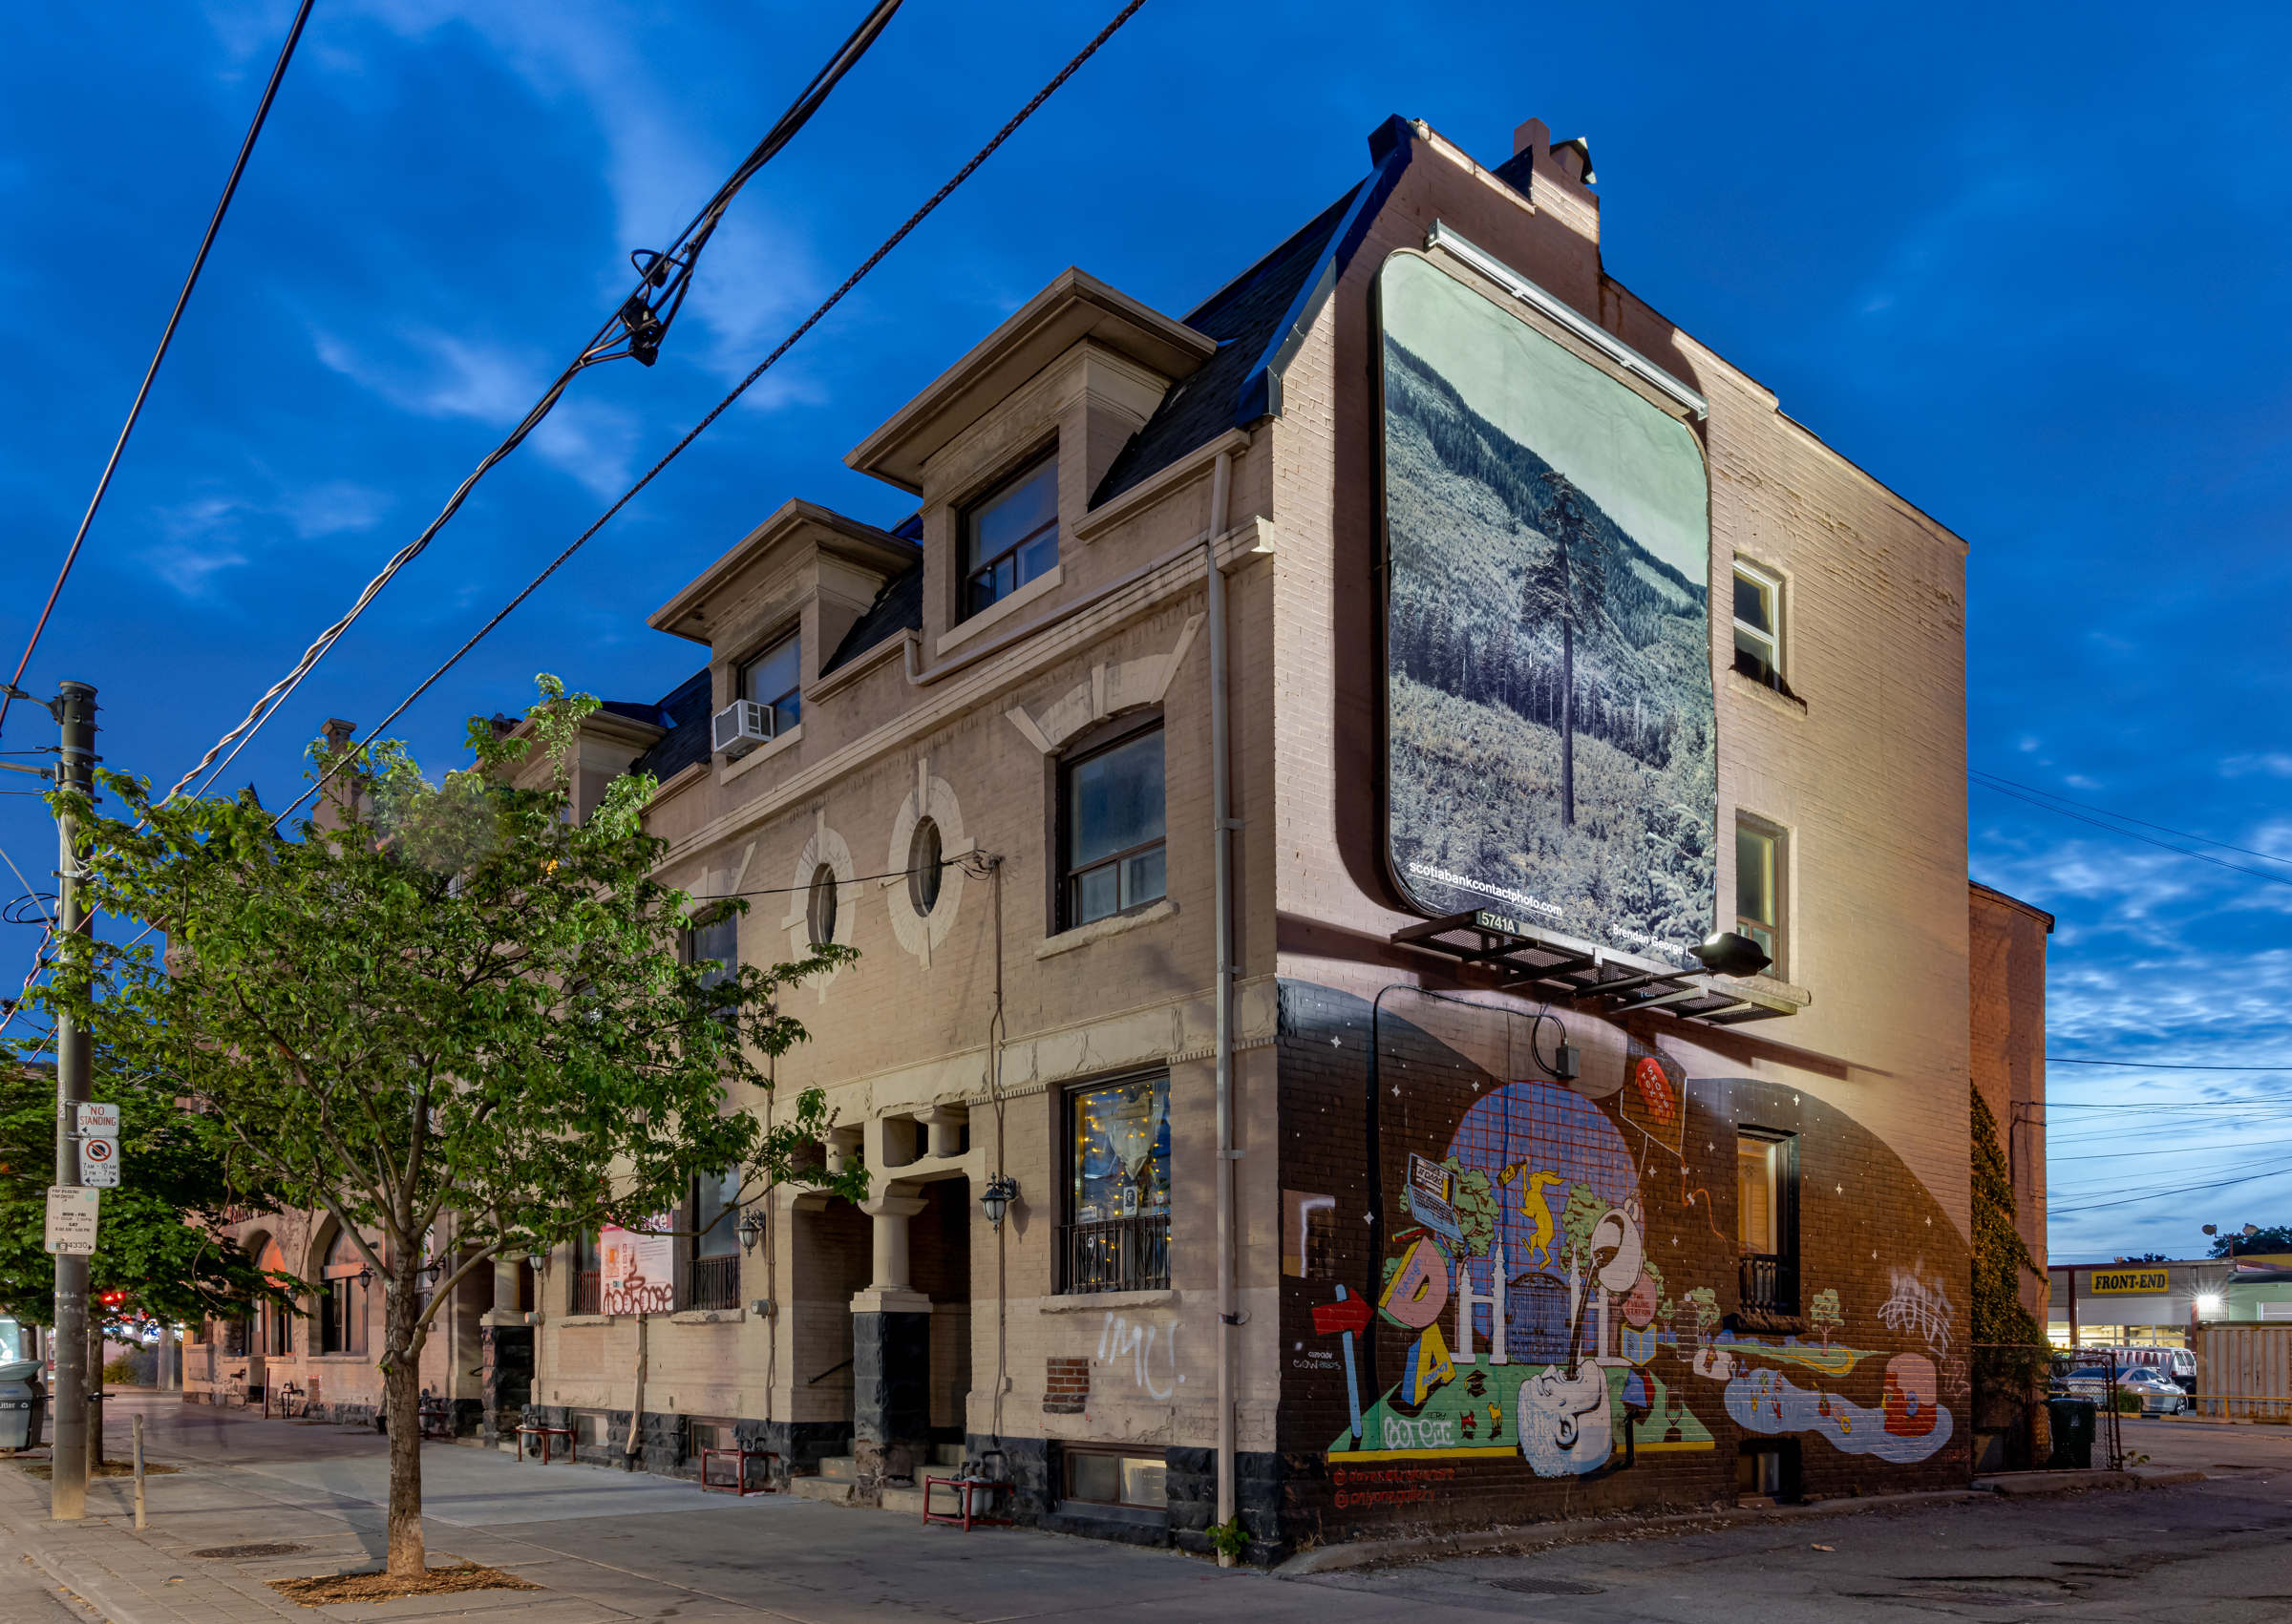     Brendan George Ko, The Forest is Wired for Wisdom, installation on billboards in Toronto and 9 other Canadian cities, 2022. Courtesy of the artist and CONTACT. Photo: Toni Hafkenscheid

